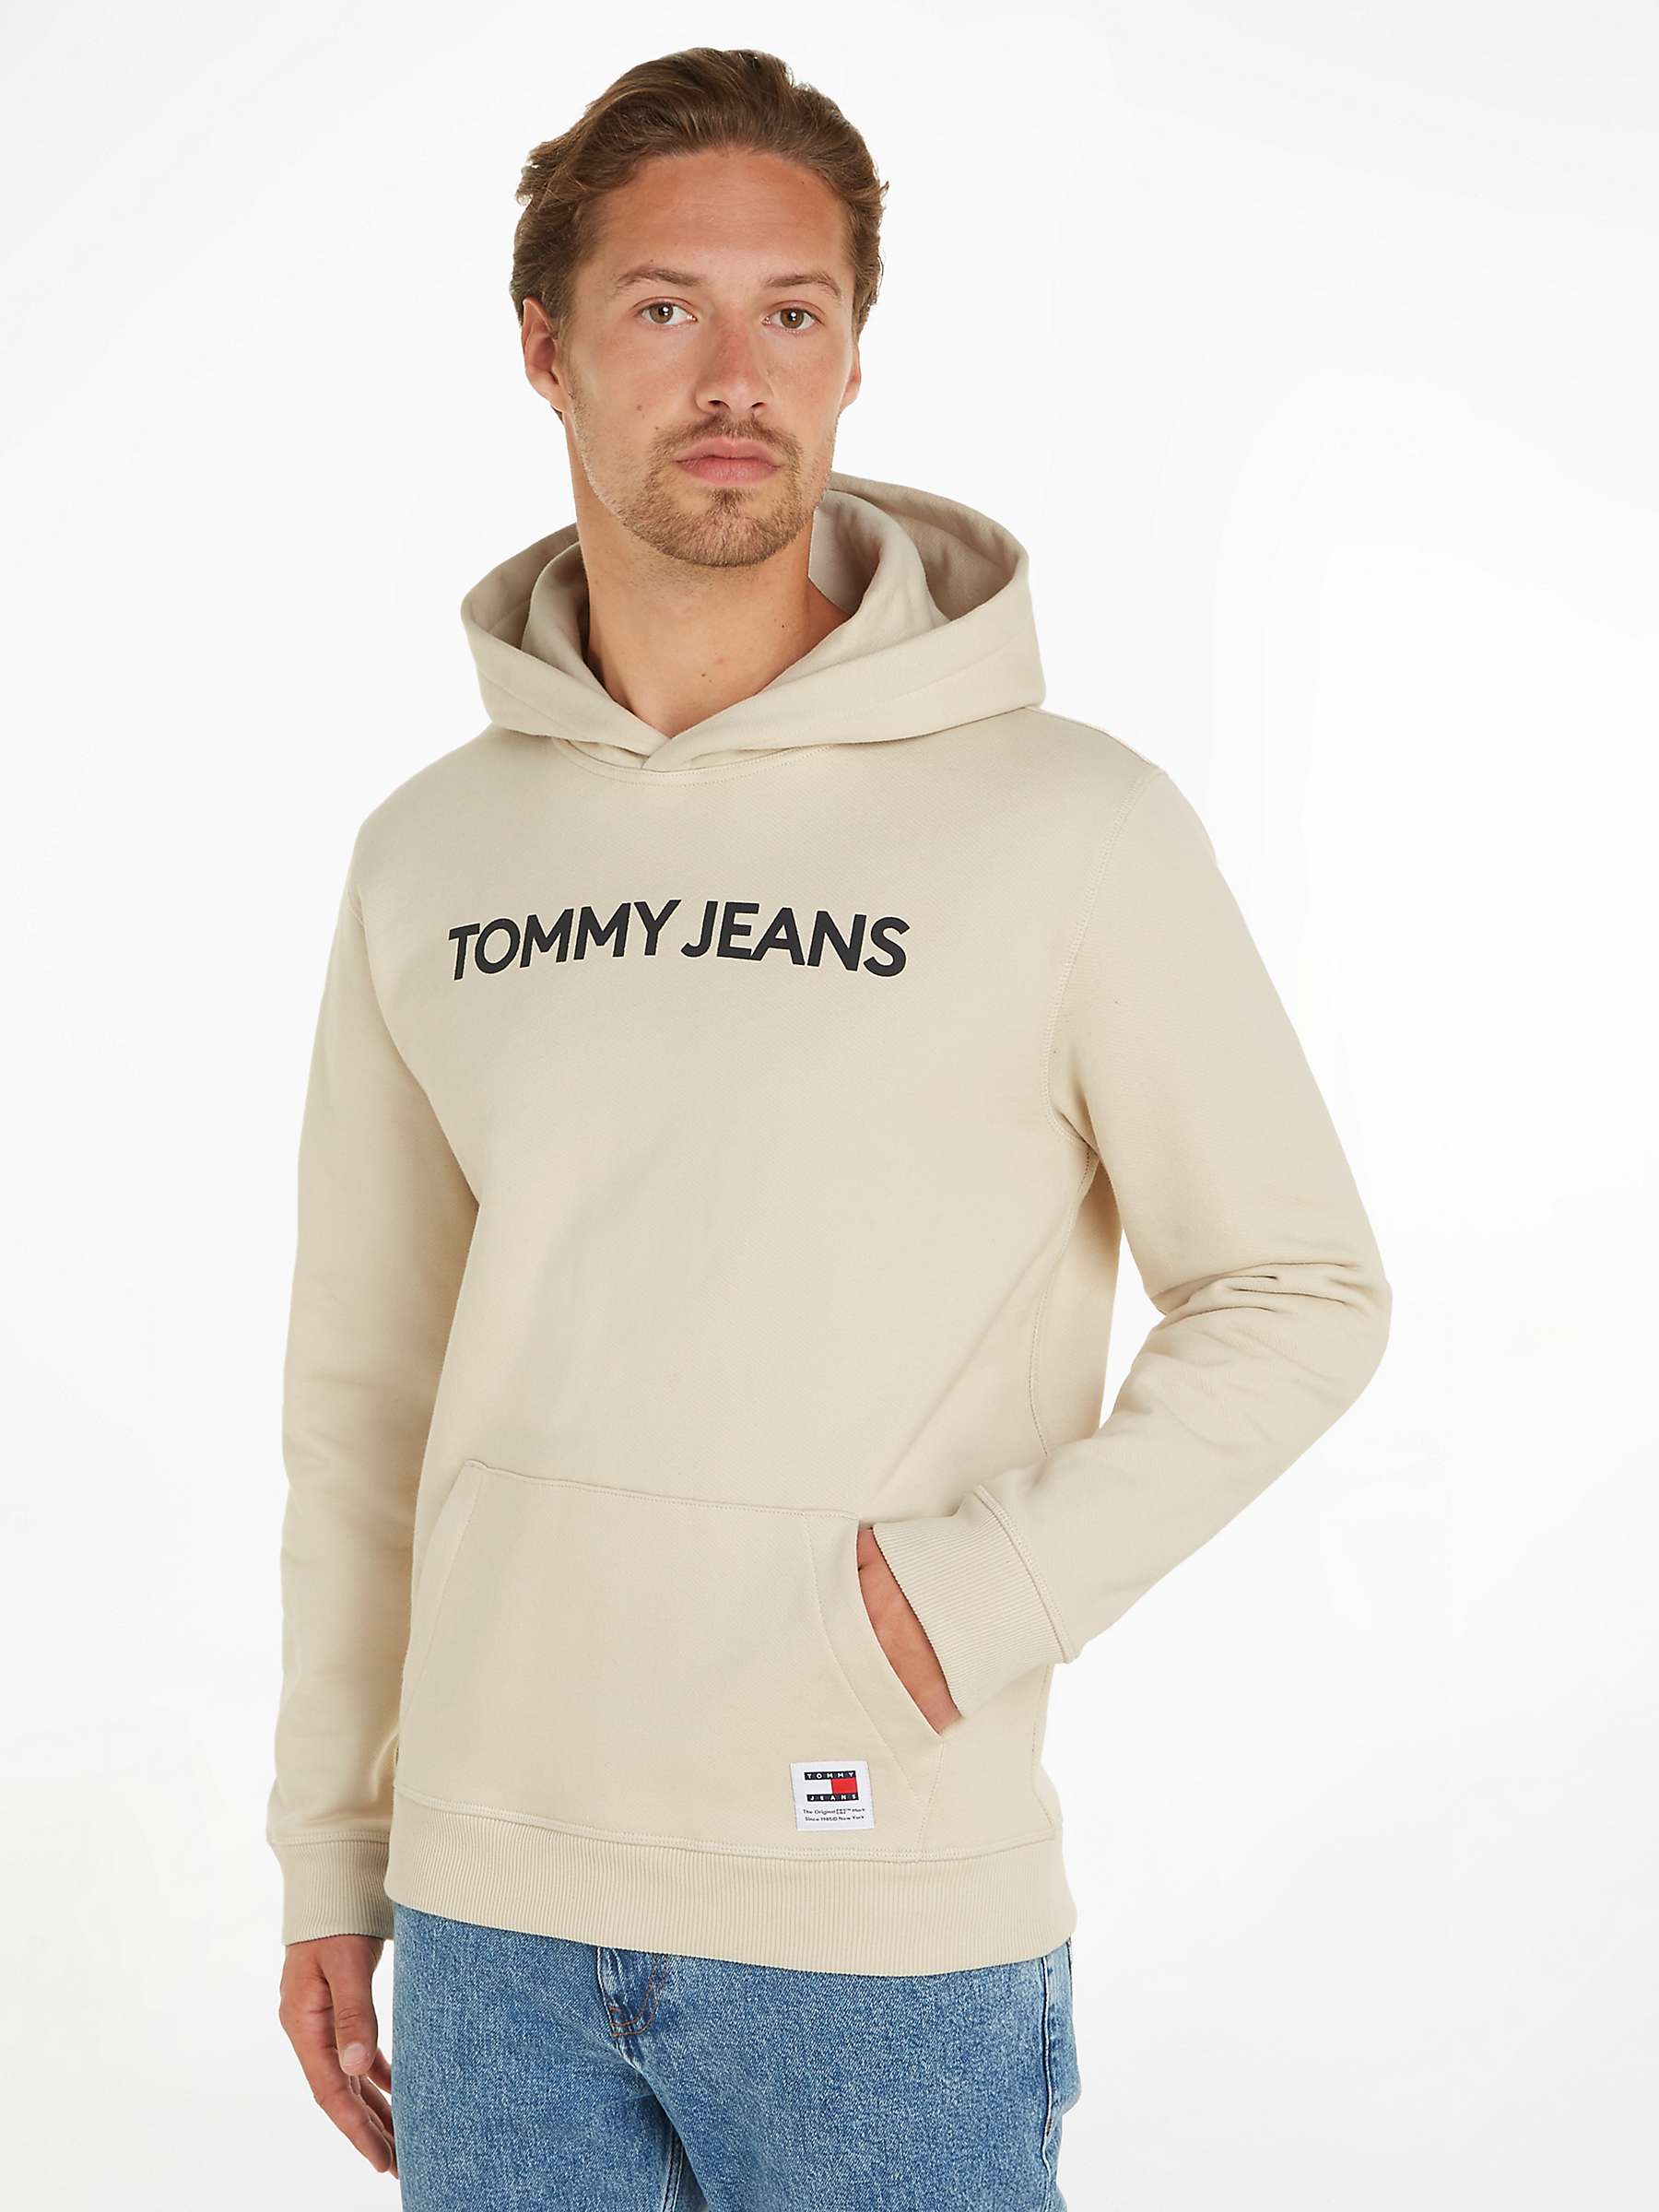 Buy Tommy Jeans Classic Pullover Hoodie, Light Brown Online at johnlewis.com